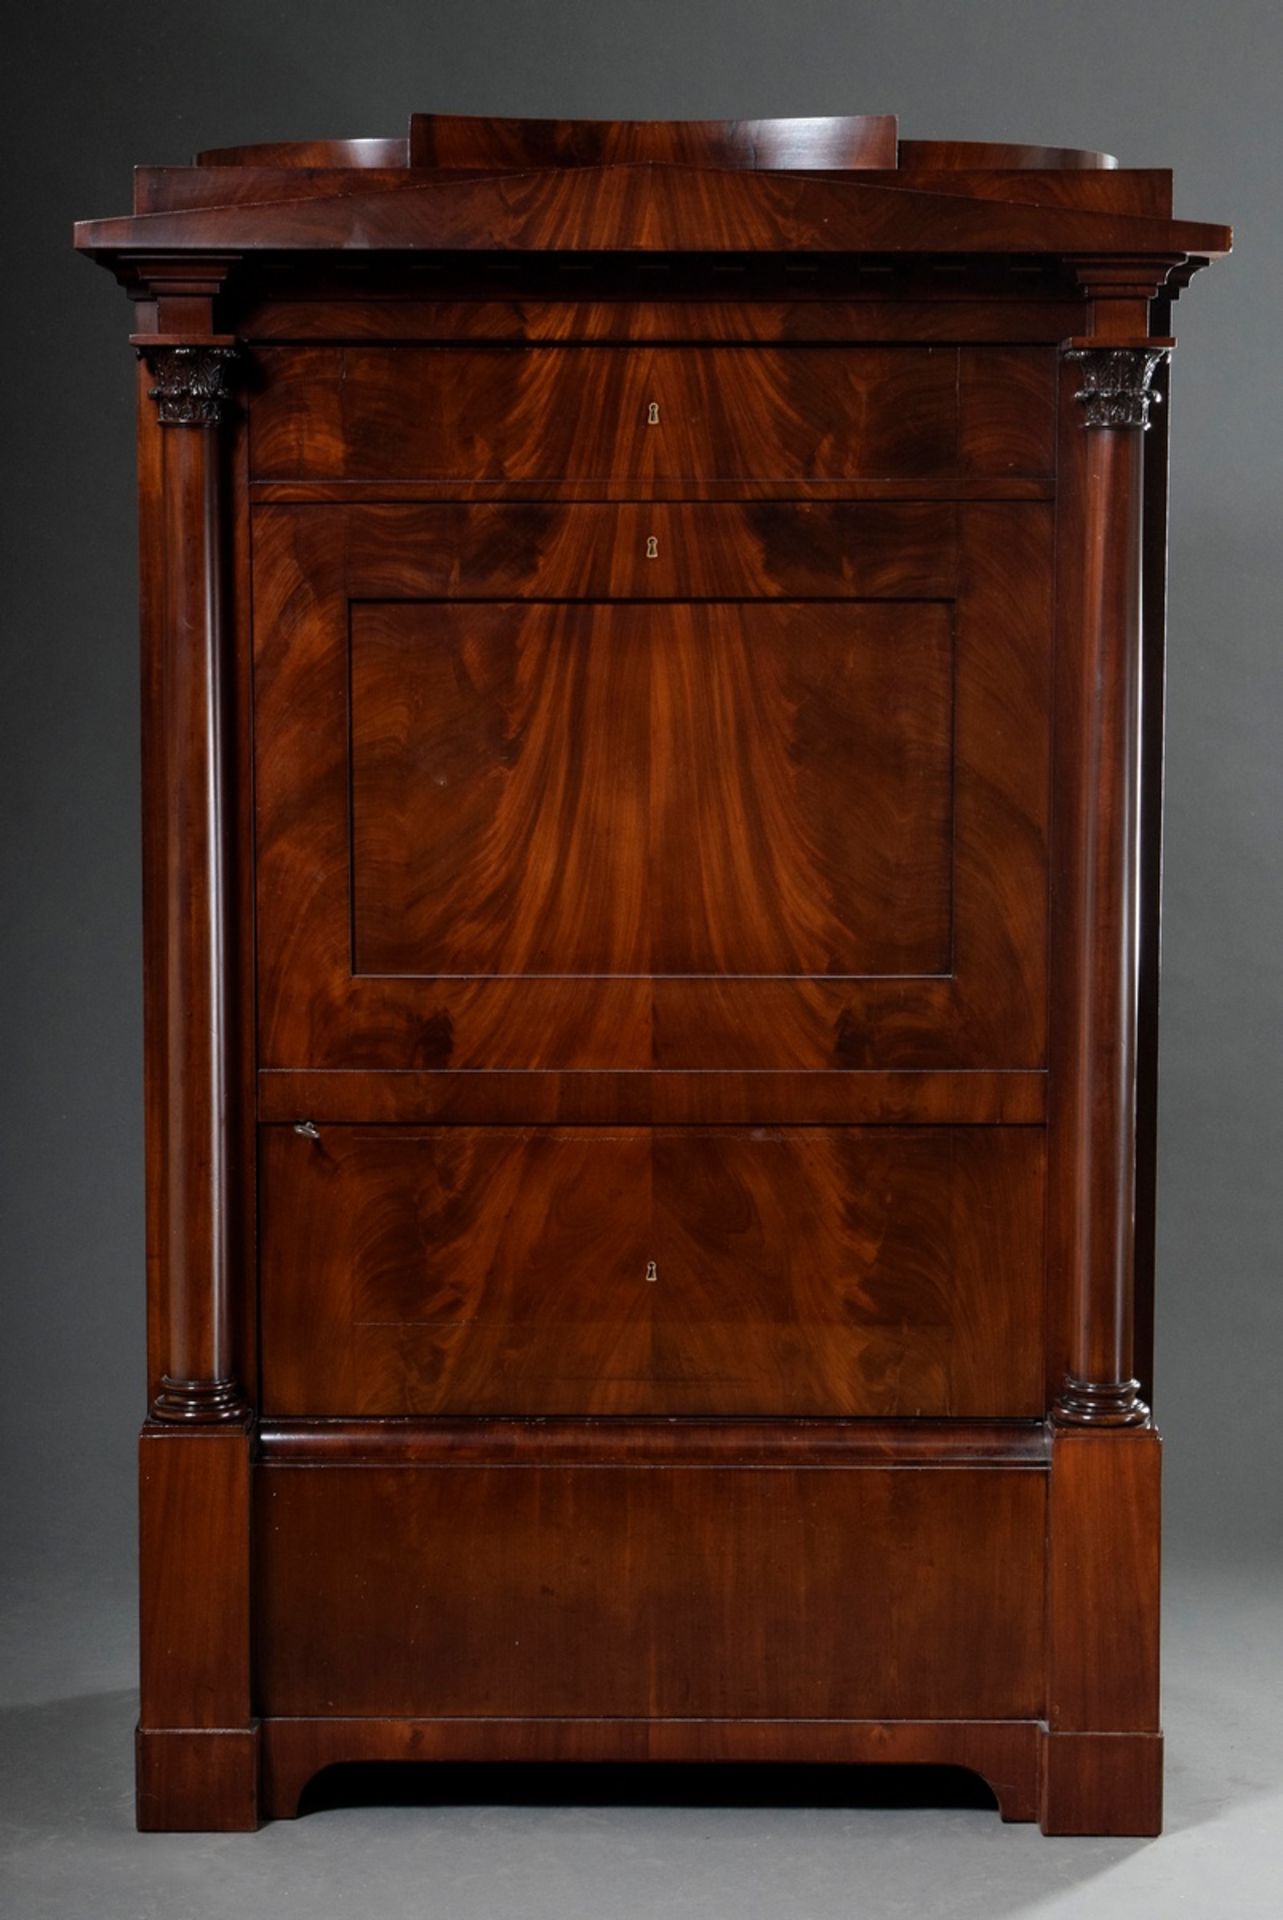 Single-door Biedermeier "Blender" cabinet with pointed gable and lateral solid columns, 19th centur